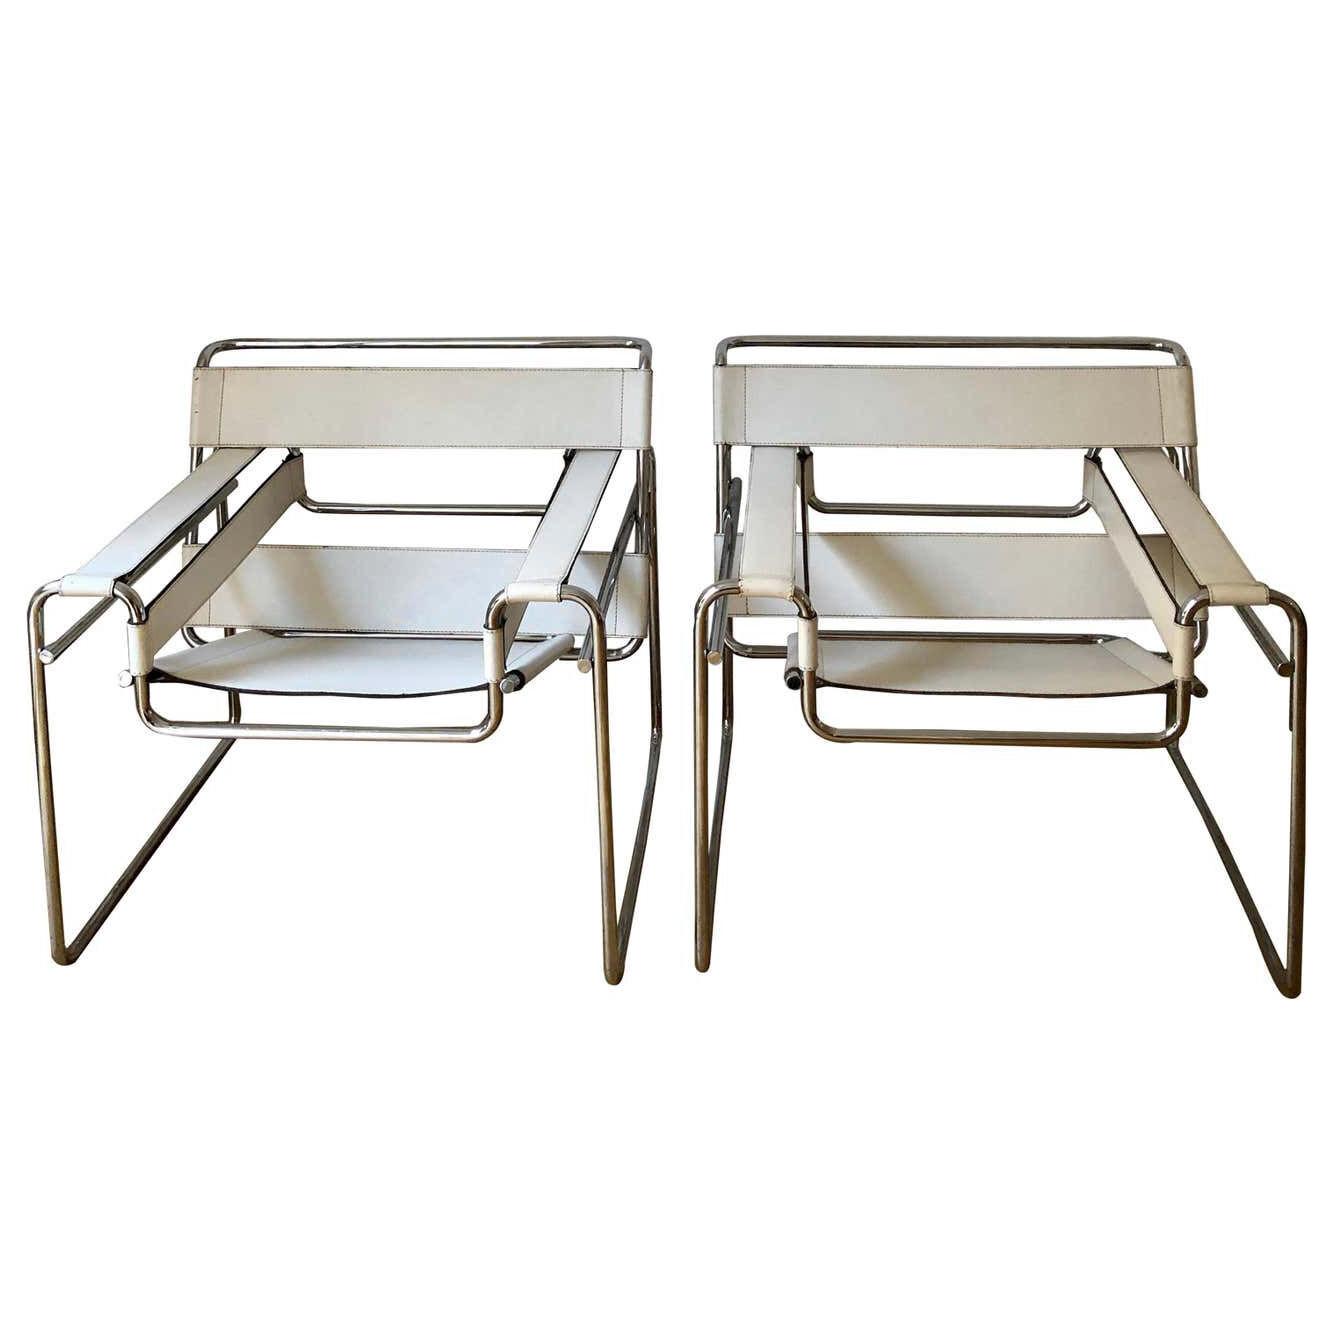 Pair of Wassily Lounge Chair White Leather by Marcel Breuer, Gavina, circa 1962